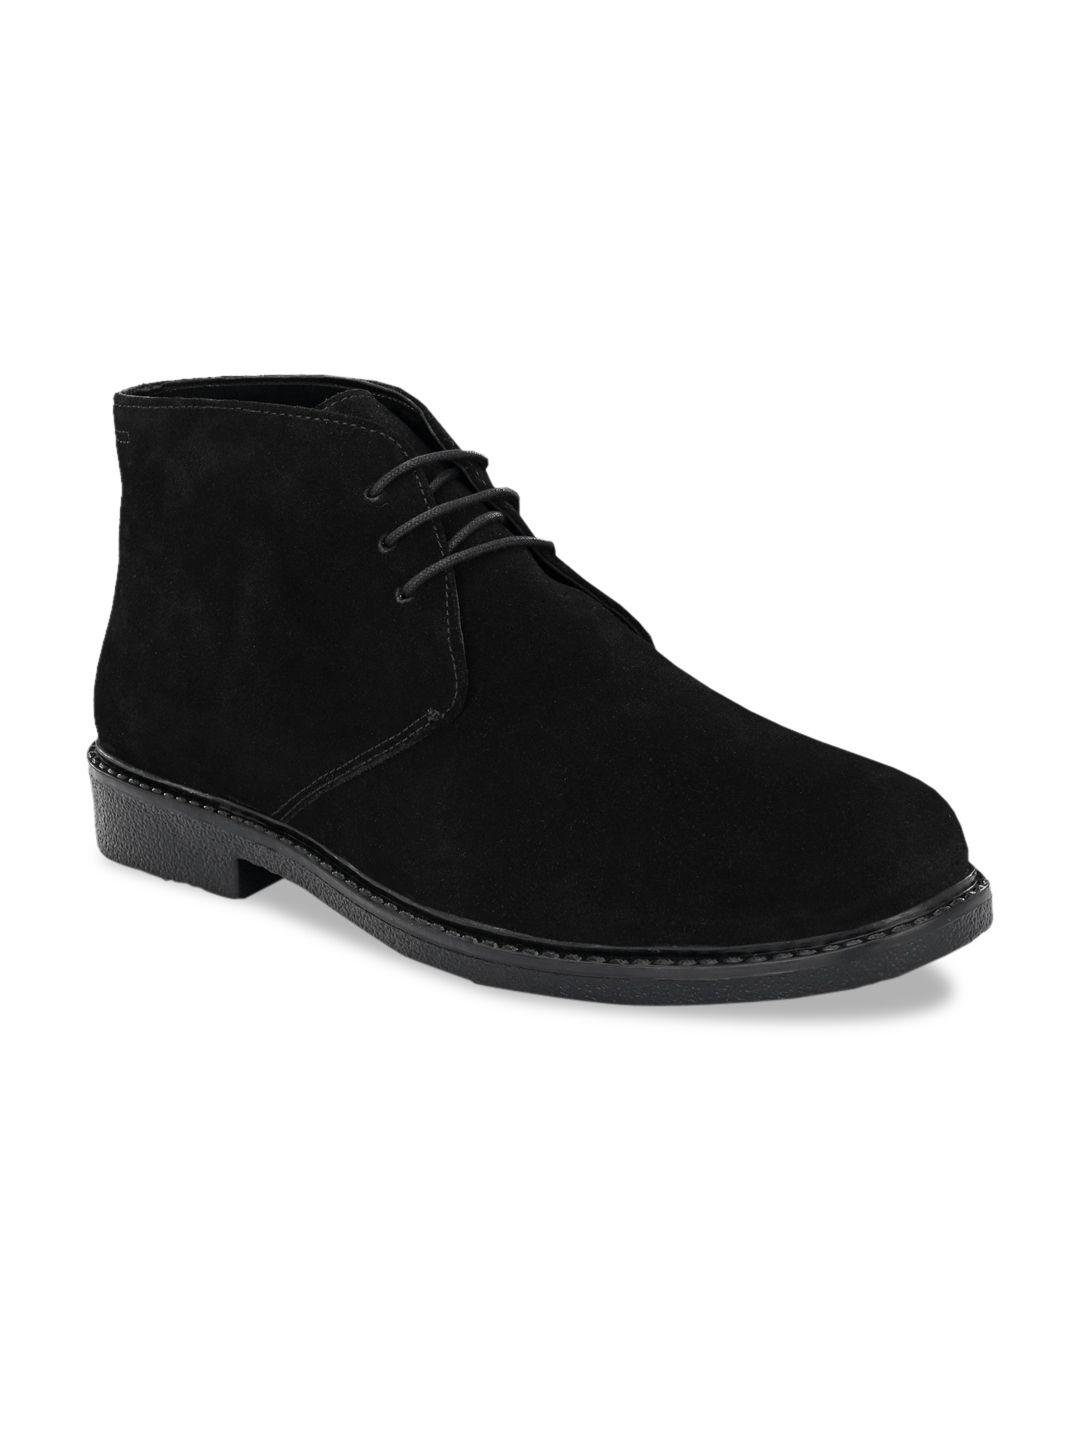 carlo romano men suede lightweight ankle flat boots